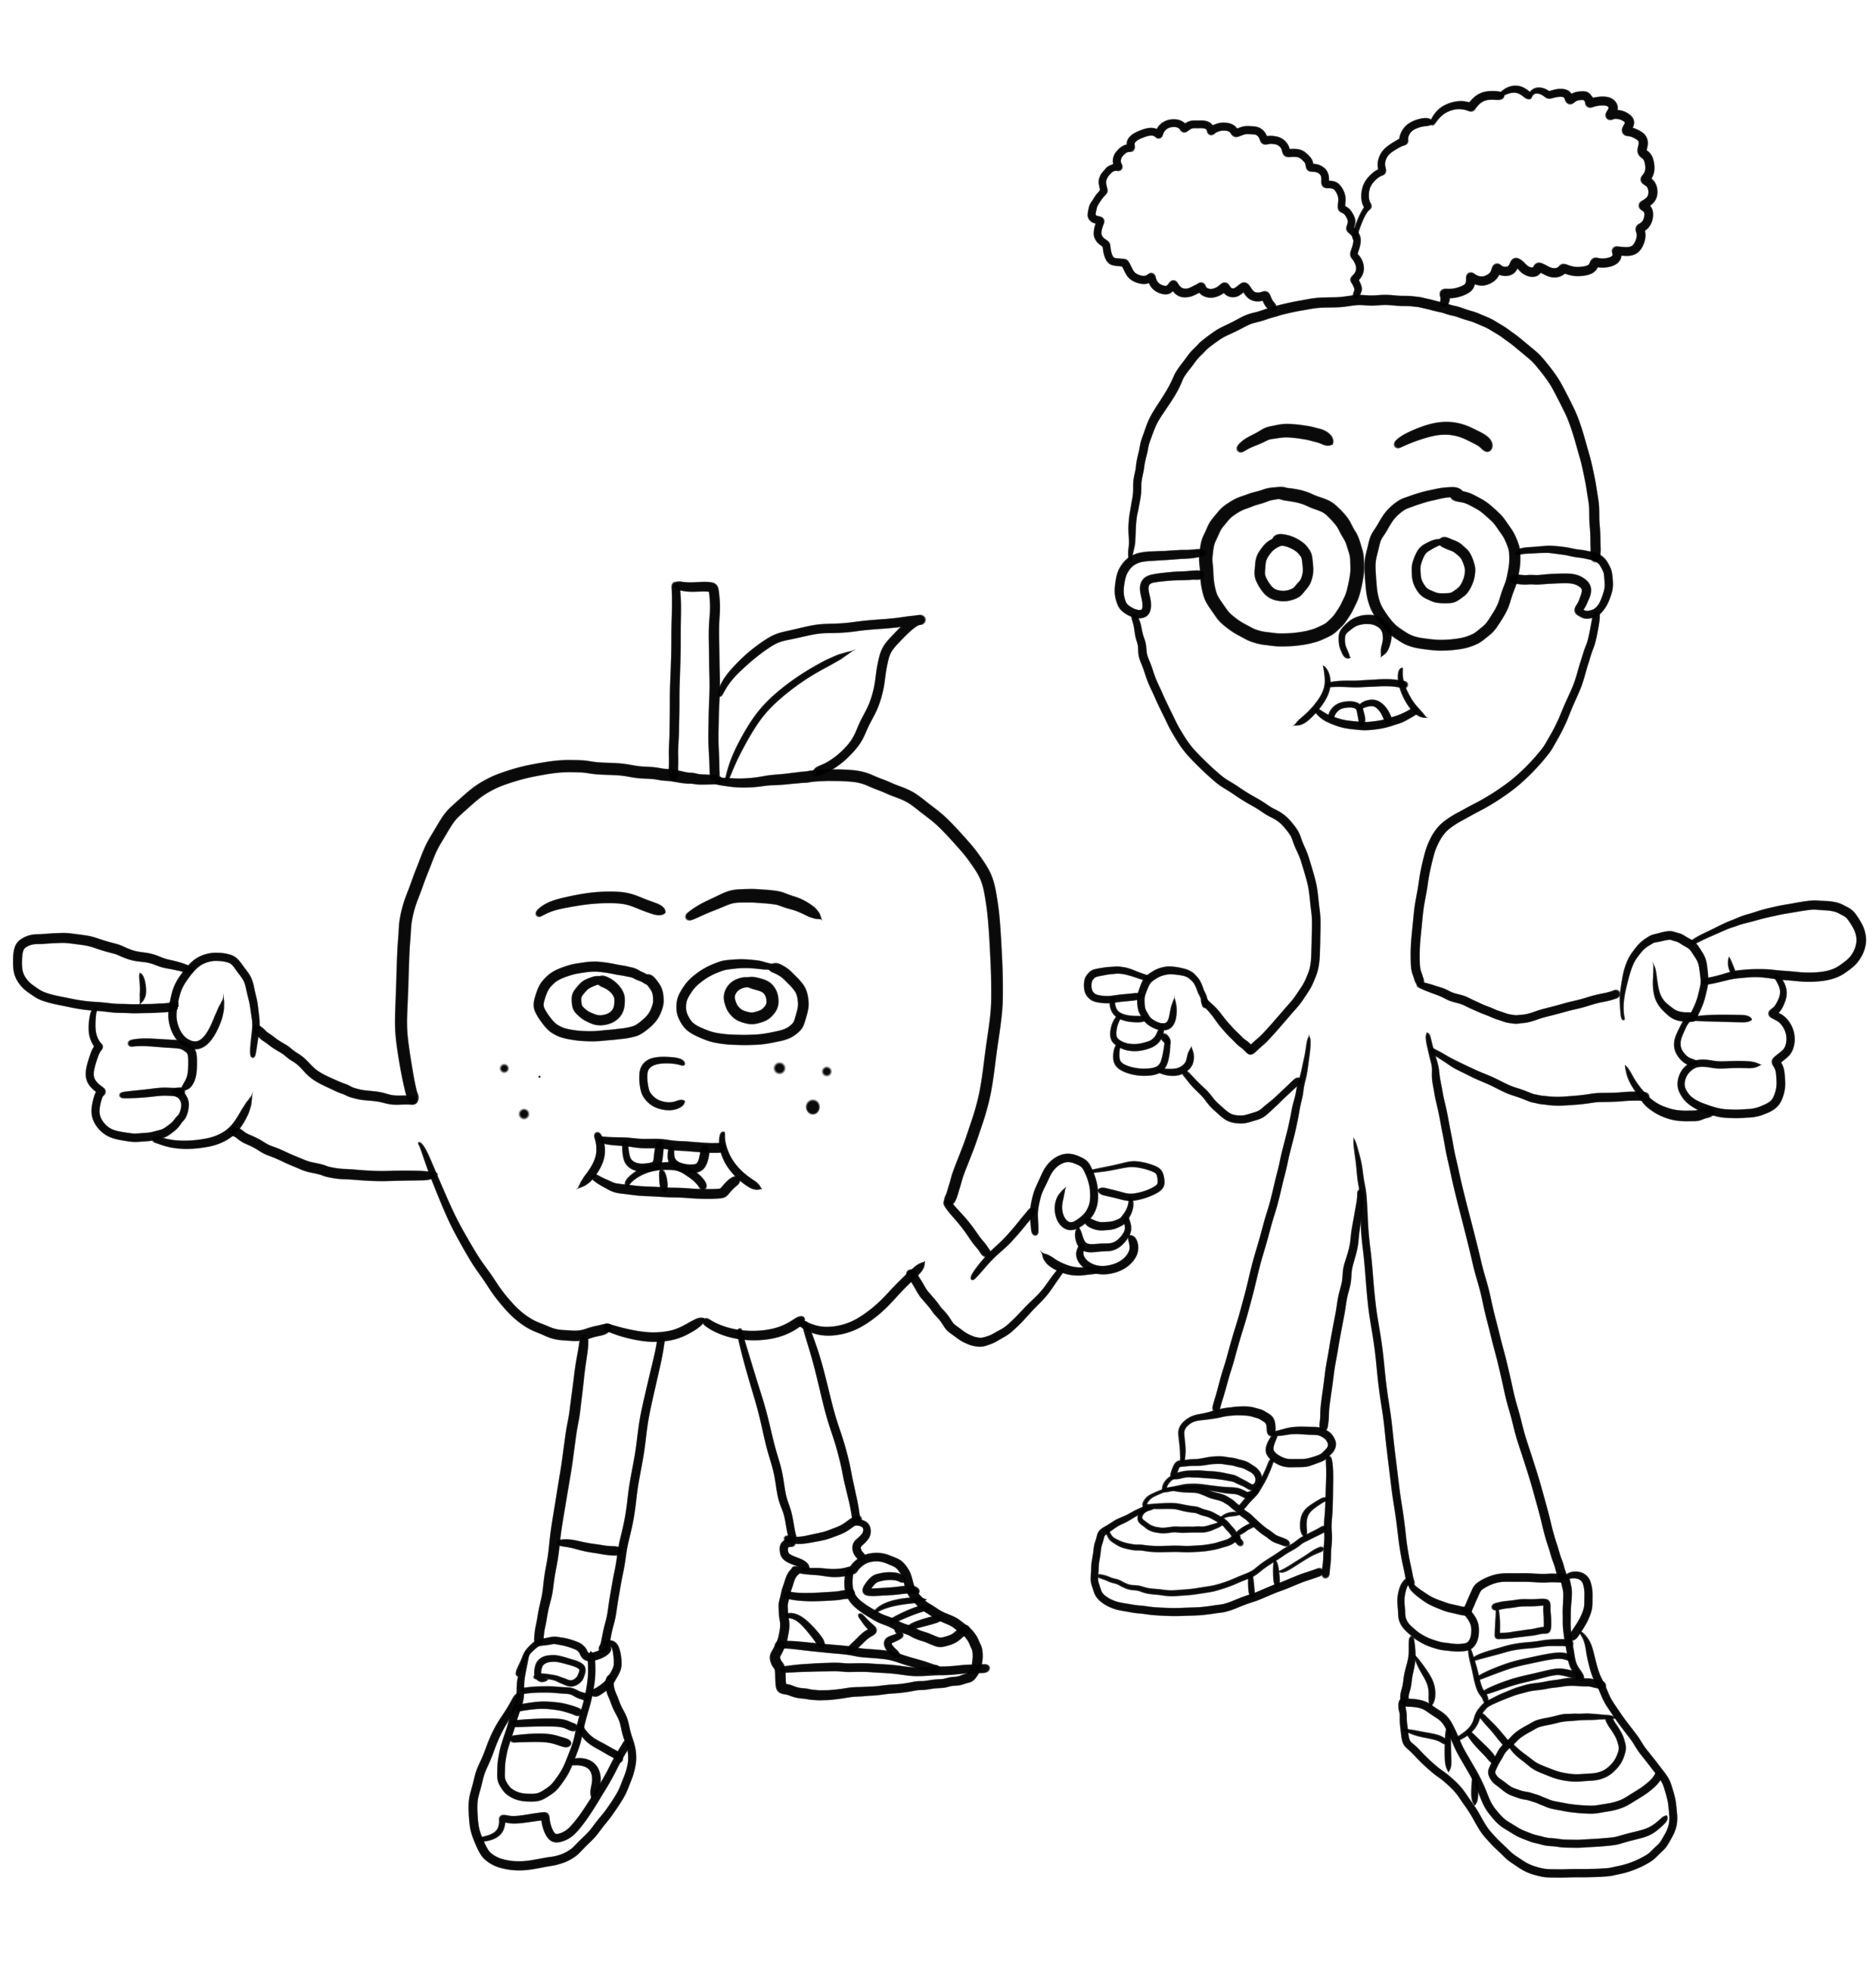 Apple & Onion 03 from Apple & Onion coloring pages to print and coloring